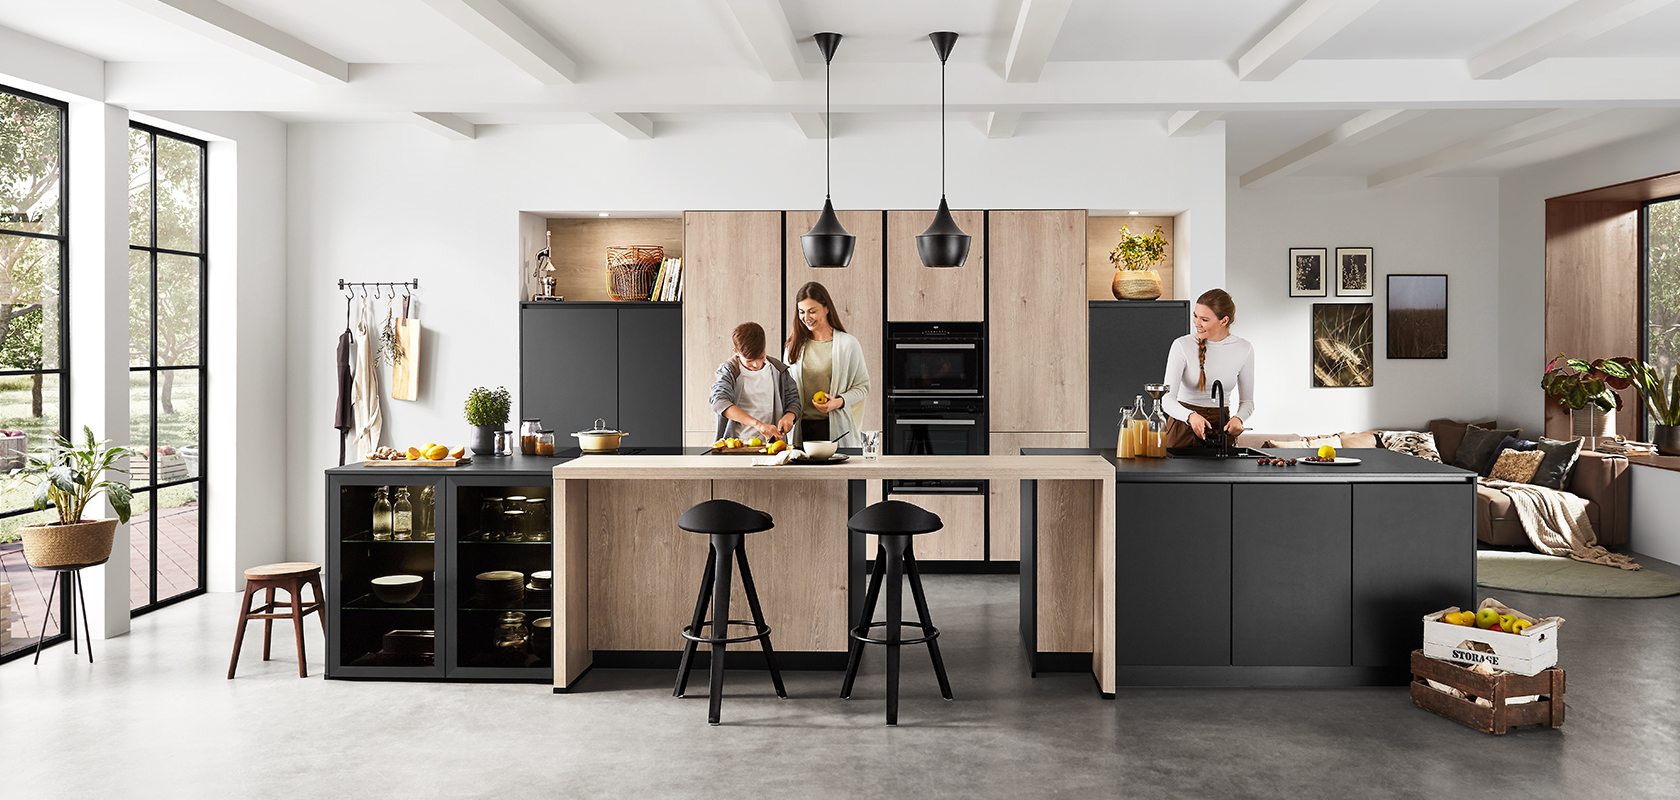 Modern kitchen interior with a spacious, clean design featuring two people cooking and chatting, highlighting functionality and contemporary style.